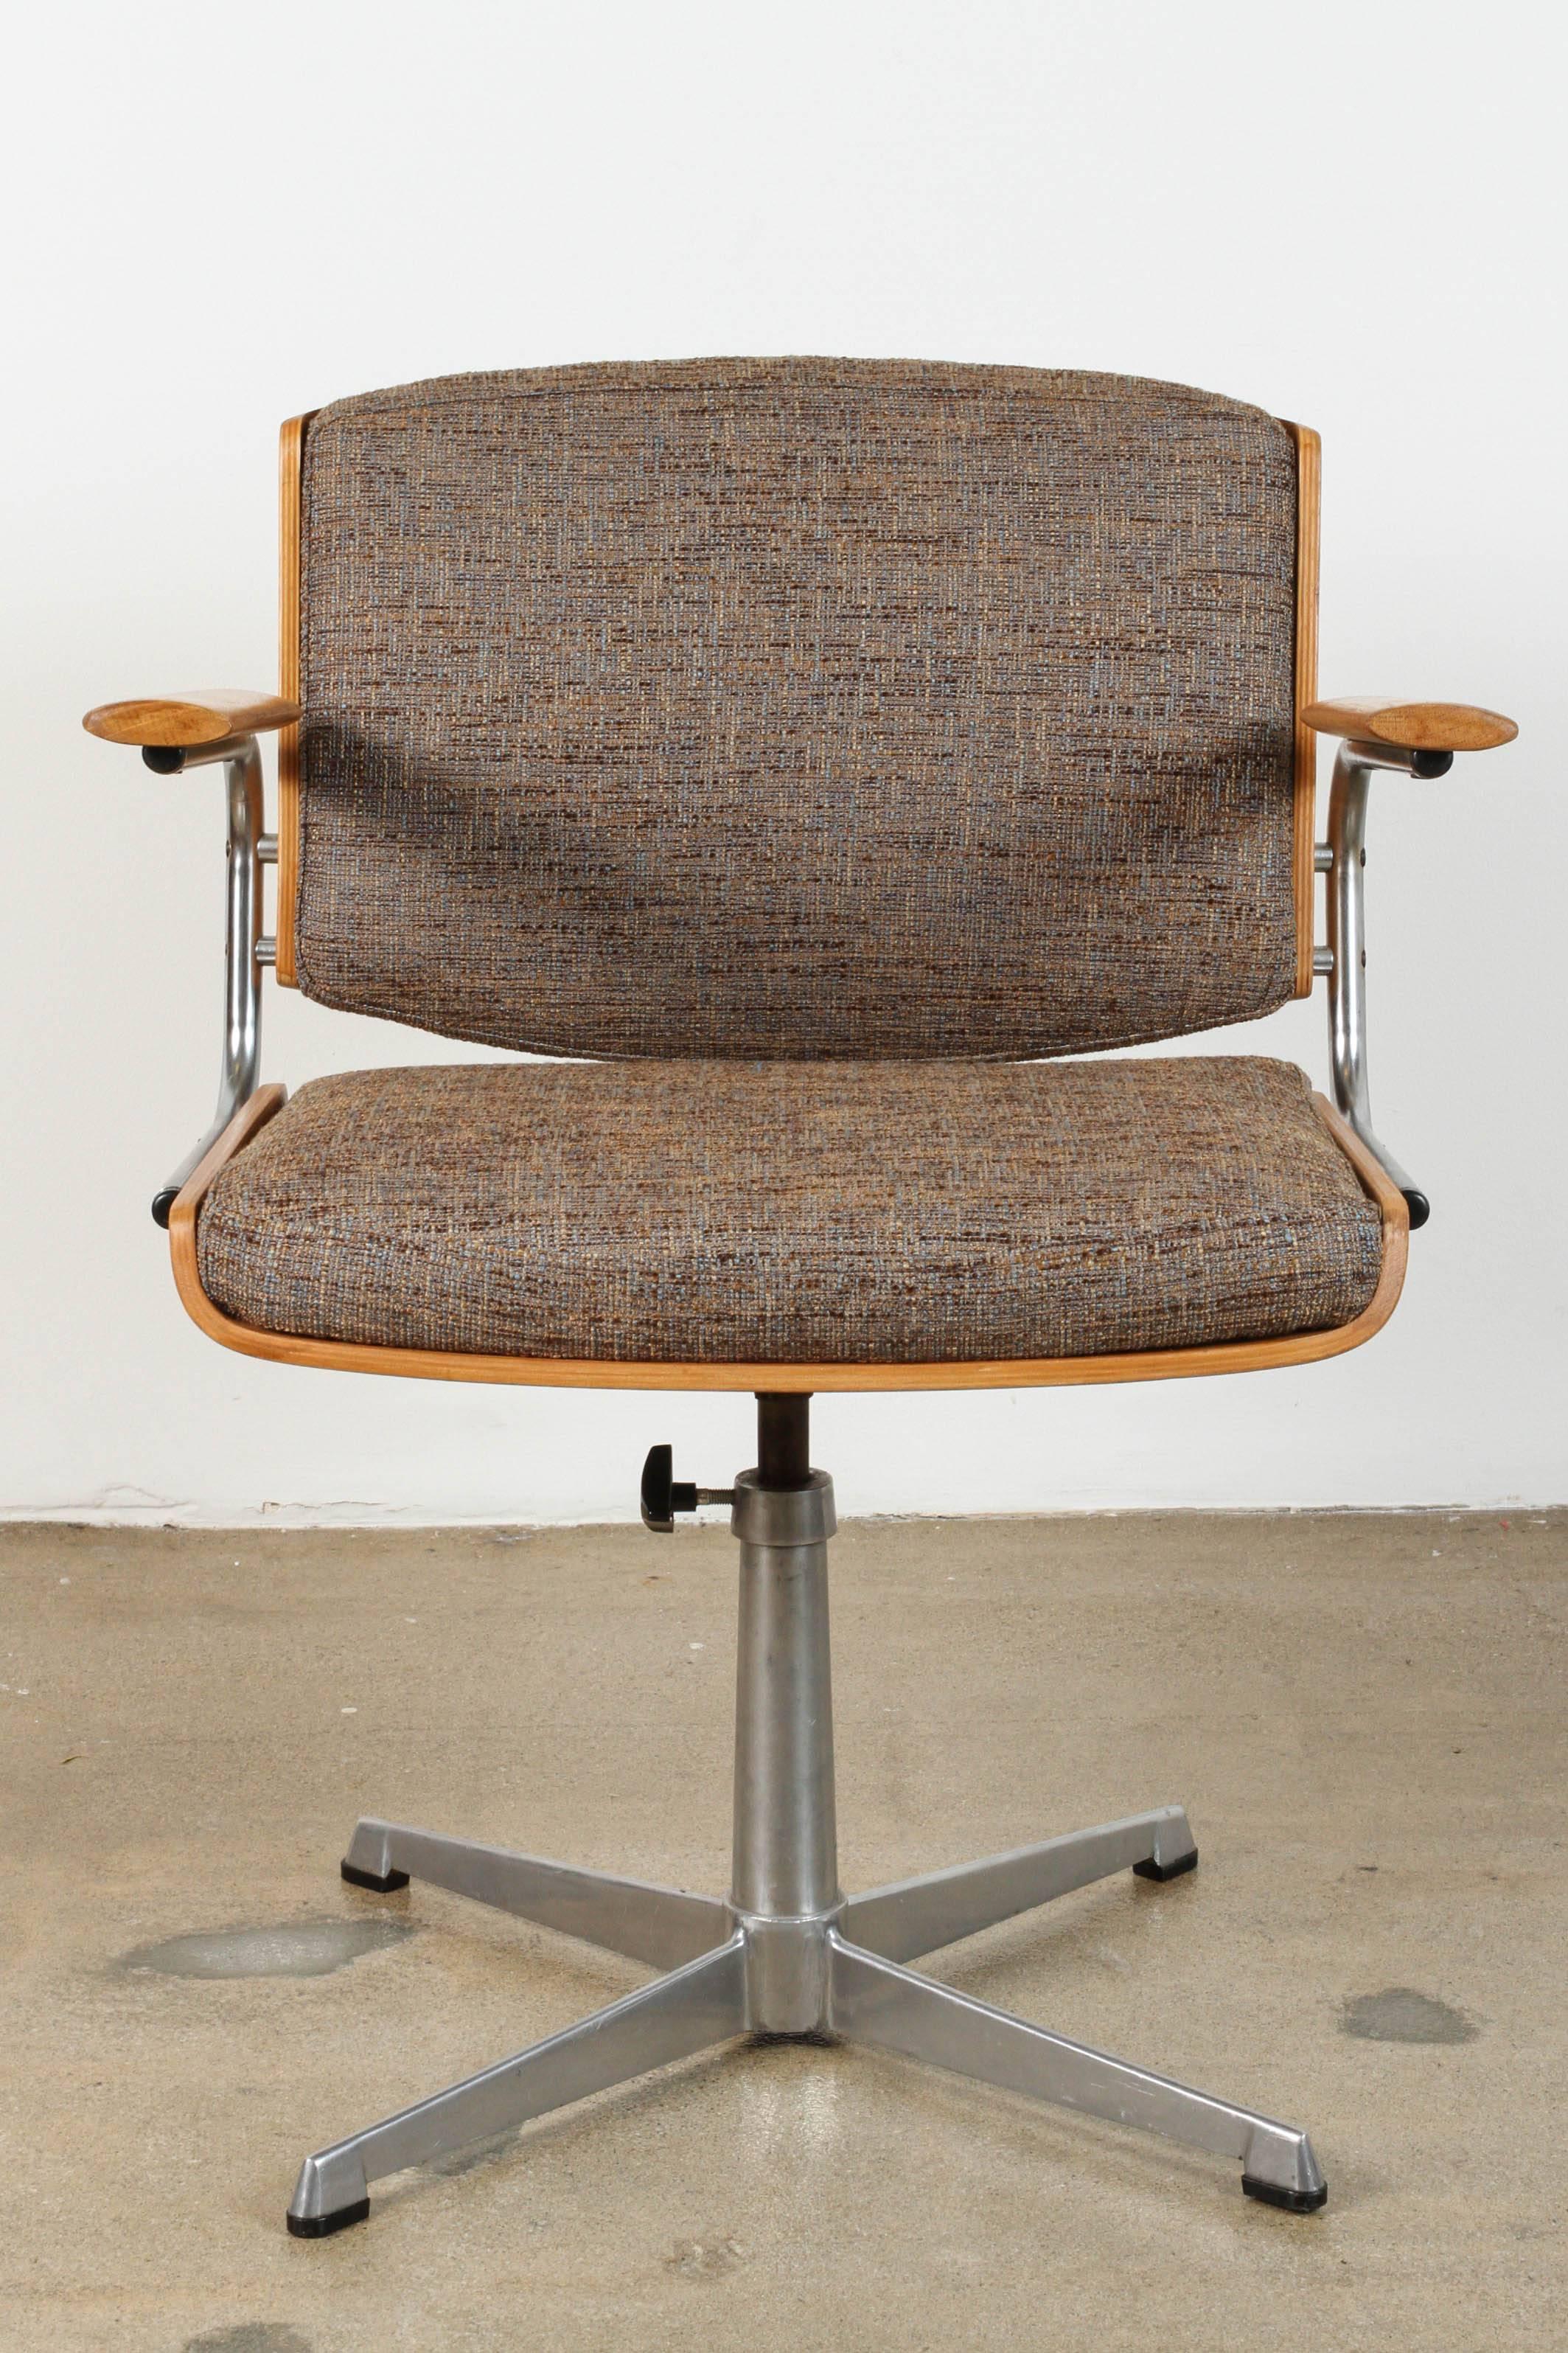 Unique dining or office chair with blonde wood arms and back and stainless steel base. Adjustable height and they swivel. Perfect for a conference room or office chair.
 